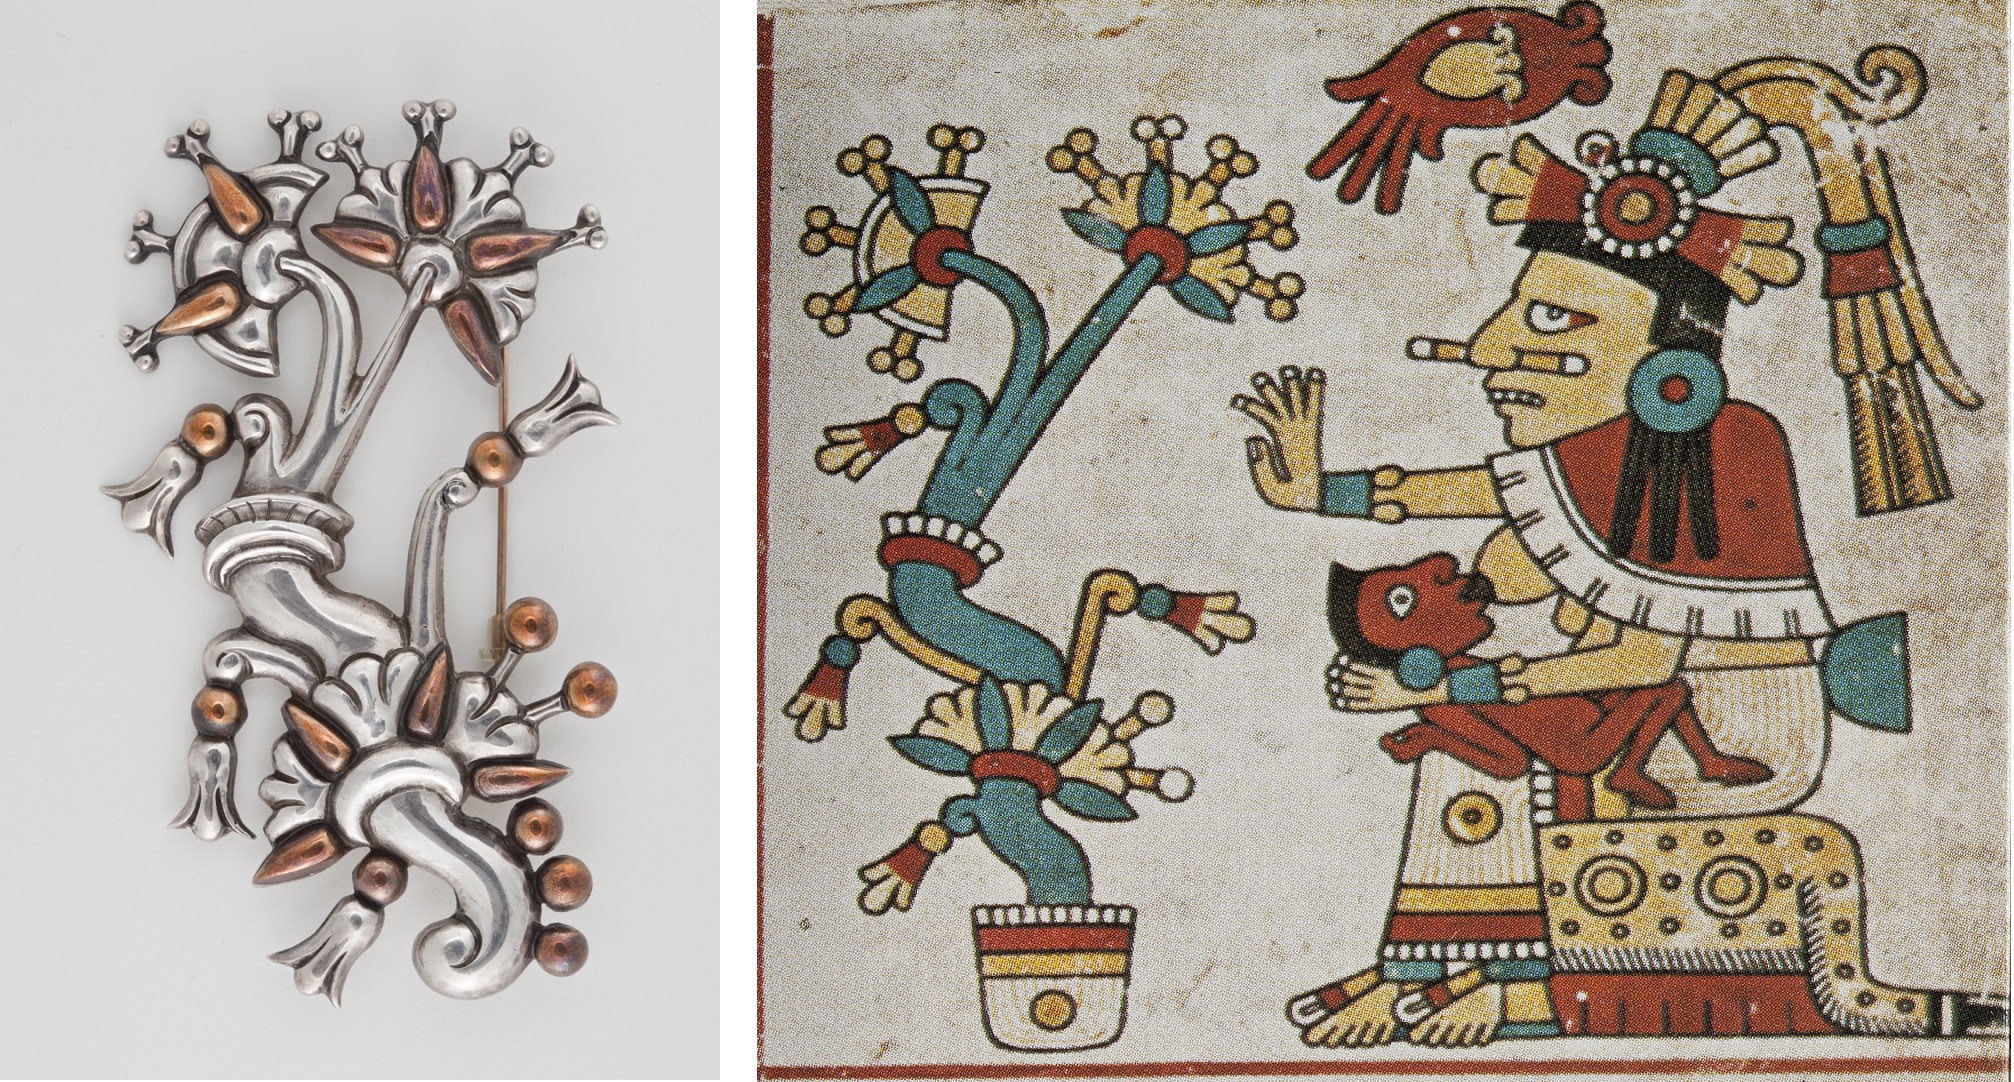 Left: William Spratling, "Tree of Life Brooch," c. 1938–44, silver and copper. Gift of Ronald A. Belkin, Long Beach, California; Right: "Xochiquetzal," from the "Codex Fejérváry-Mayer," Nahua, Mexico, 1350–1500, World Museum, Liverpool, Great Britain, folio 29, photo © 2013 Museum Associates/LACMA